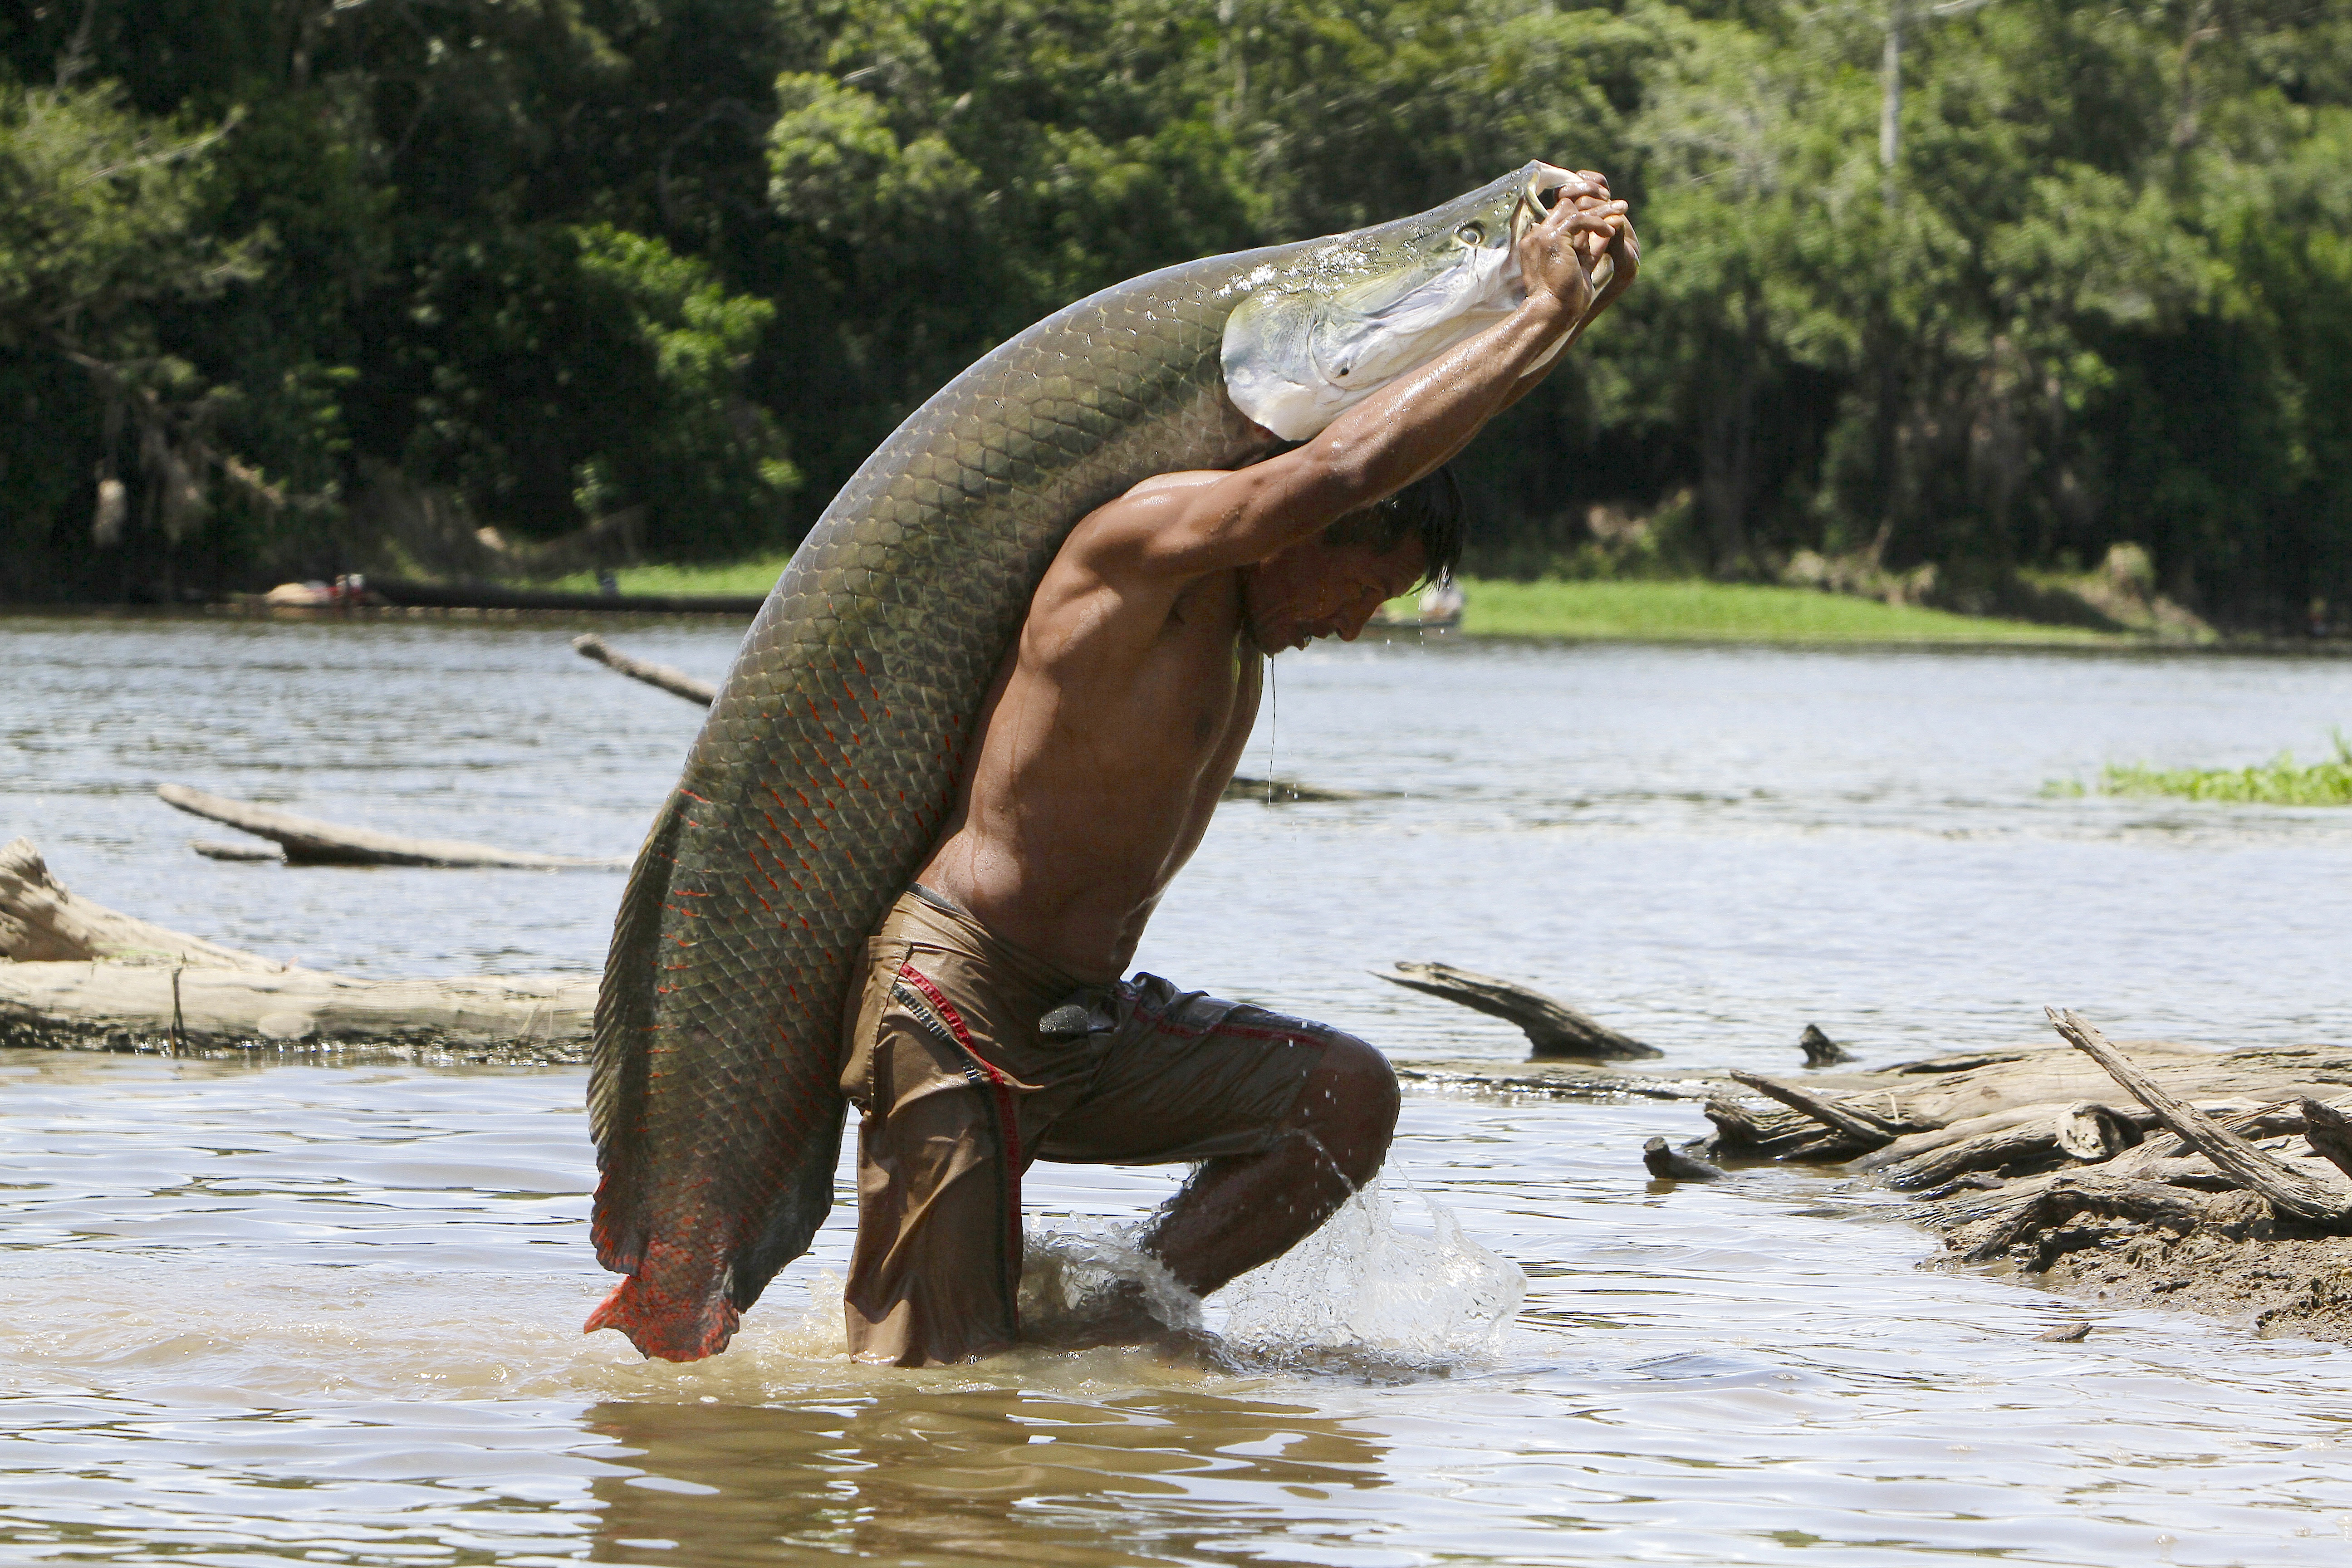 A man walking in a river carrying a very large fish on his back